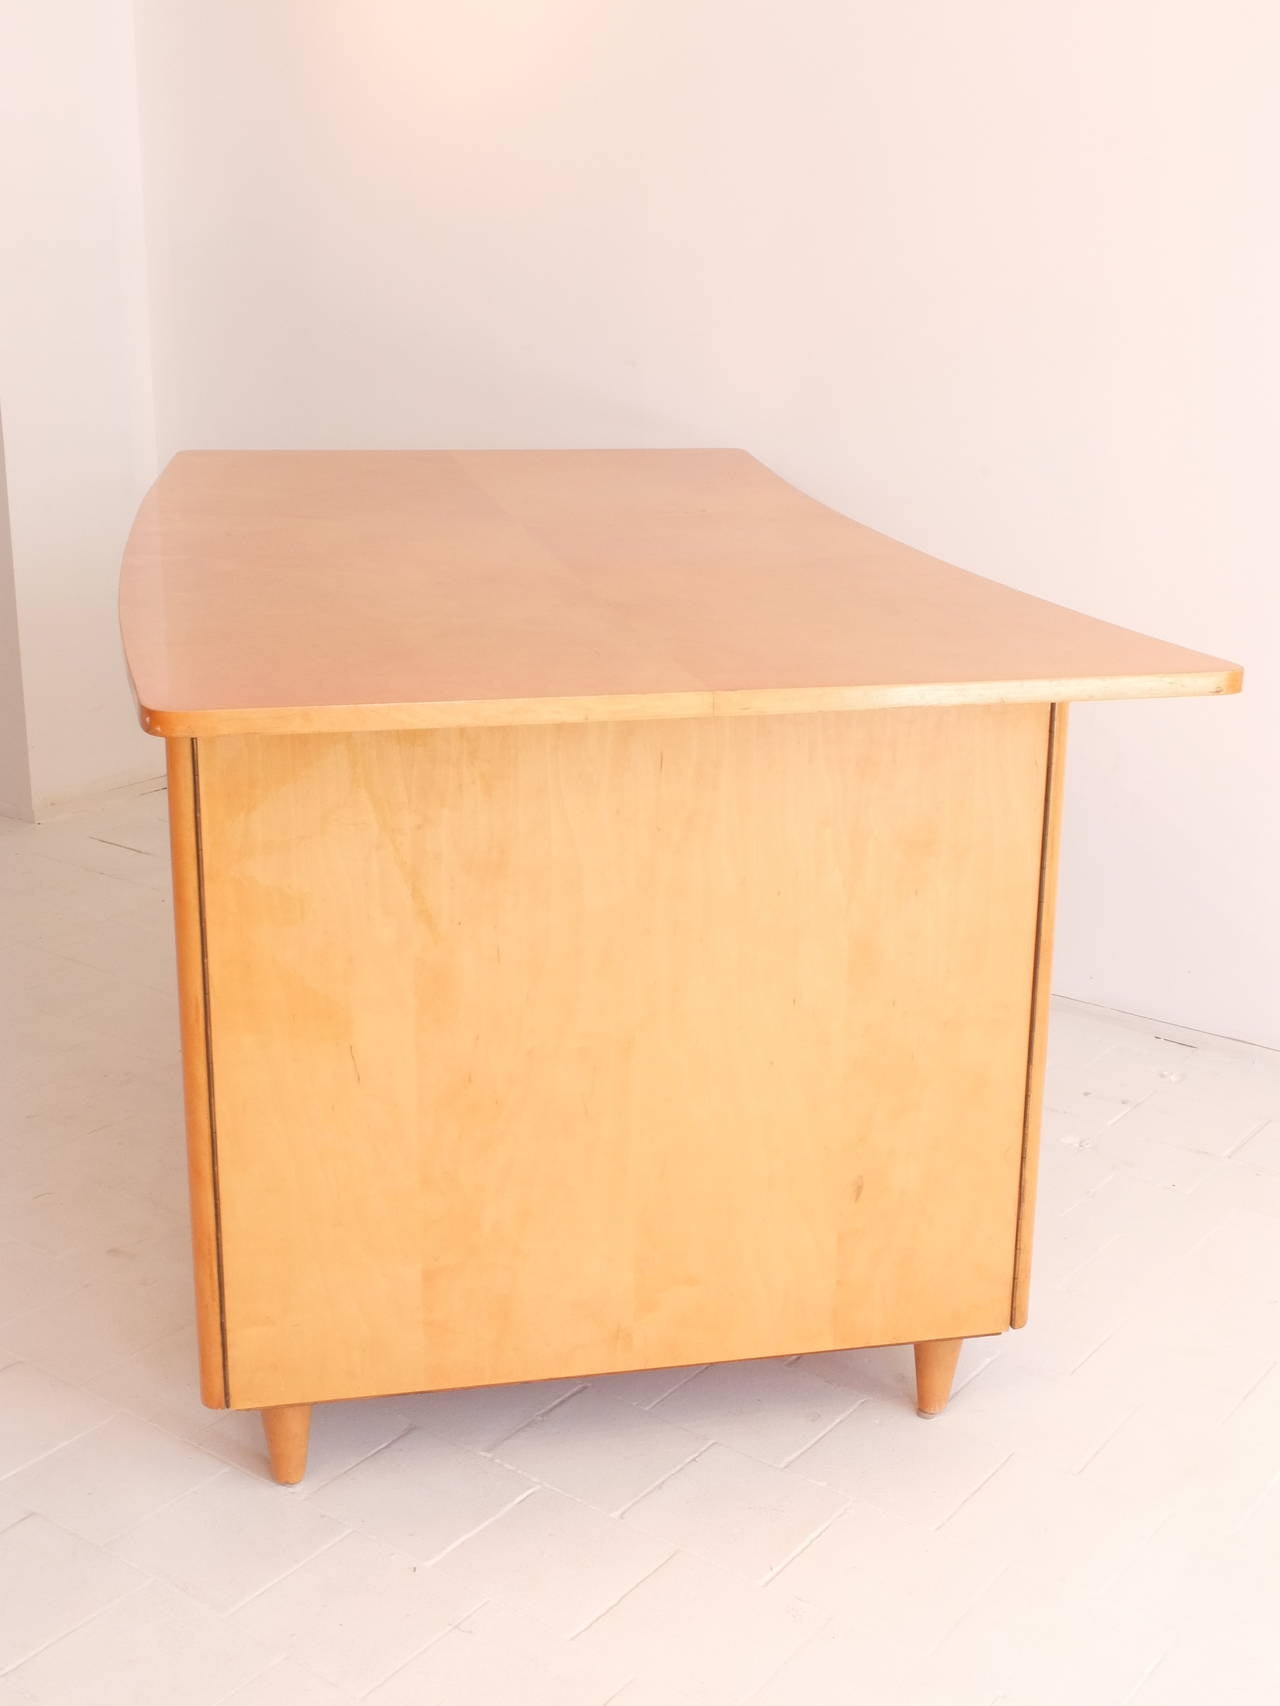 Brass Mid-Century Double-Sided Executive Birch Desk Imexcotra For Sale